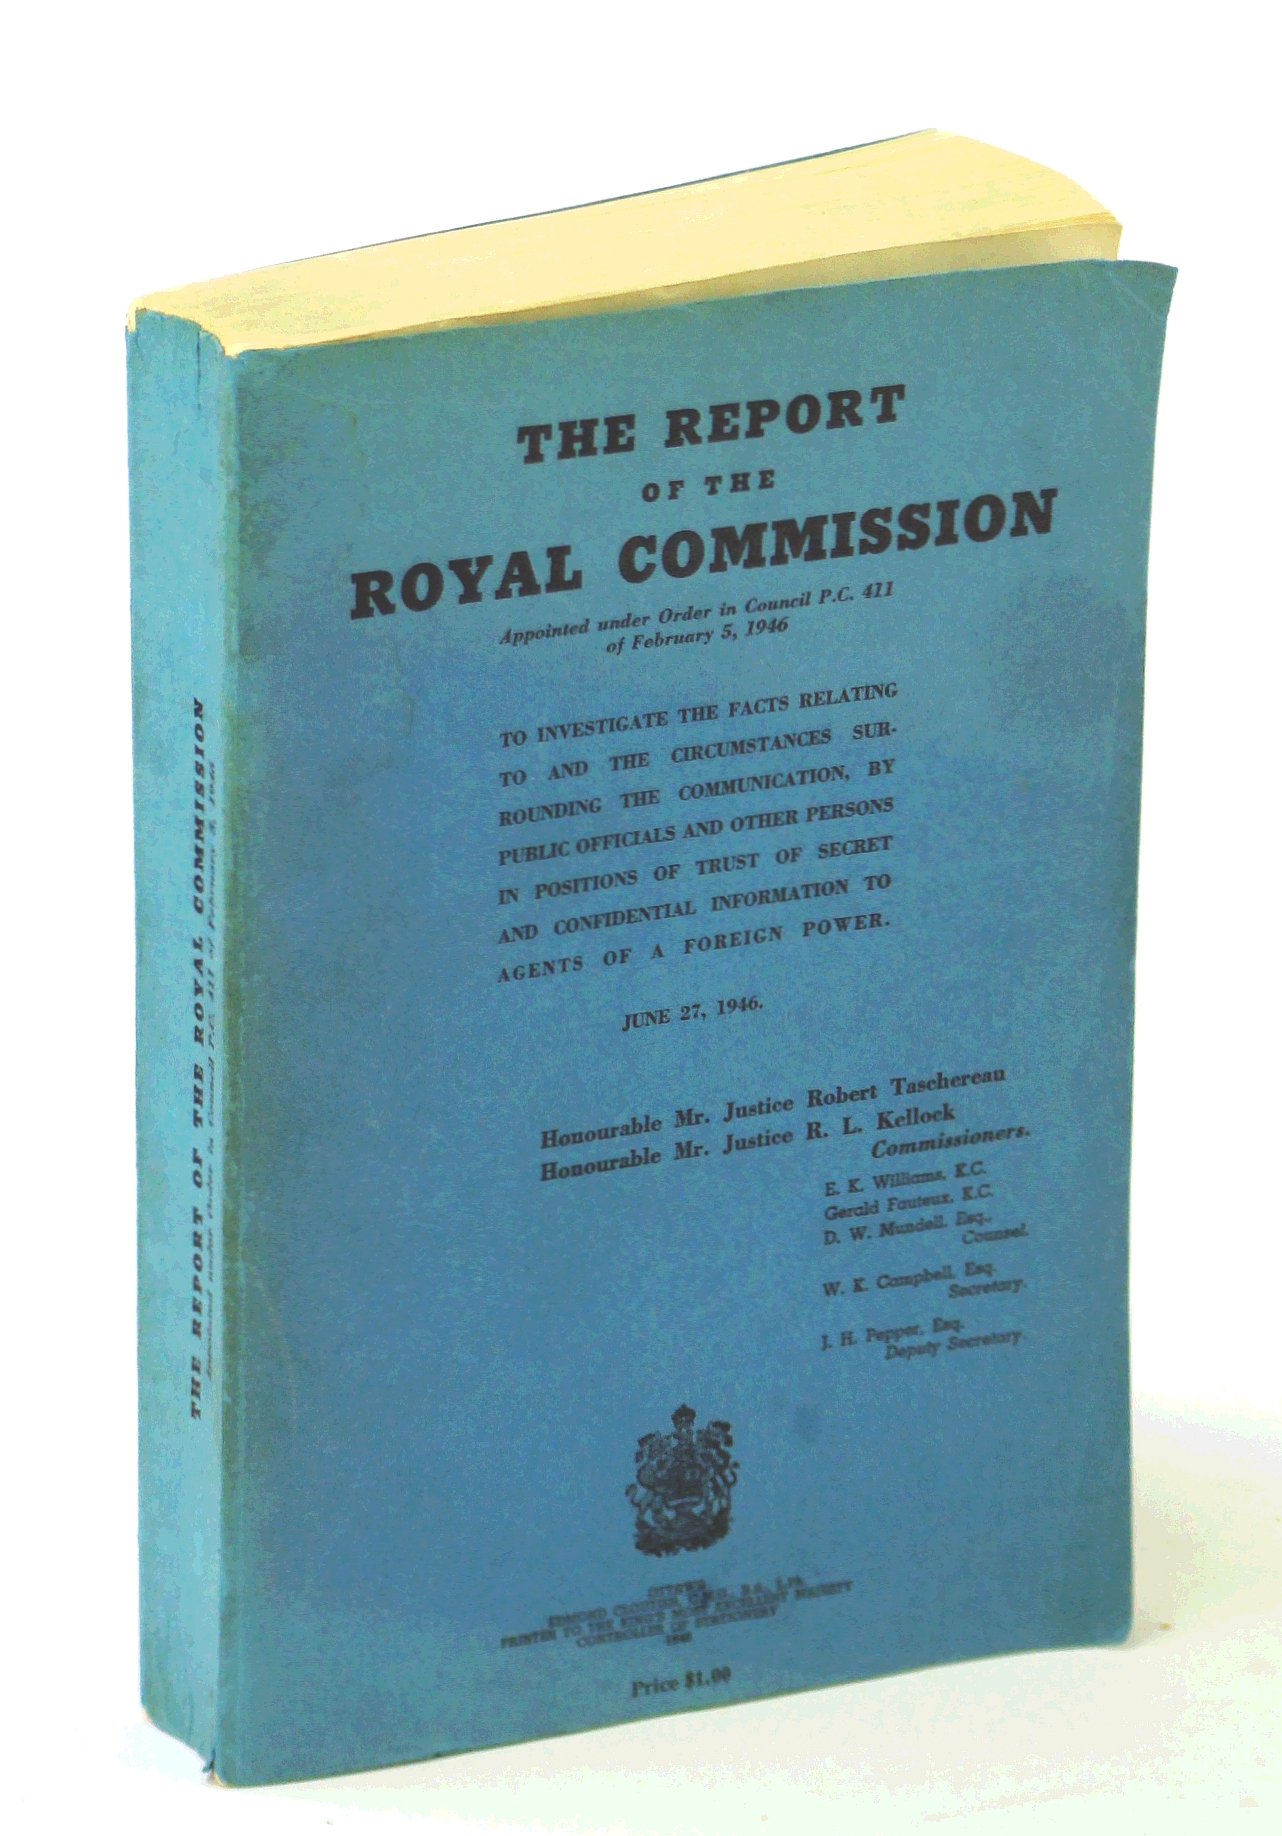 Report of the Royal Commission Appointed to Investigate Facts Relating ...